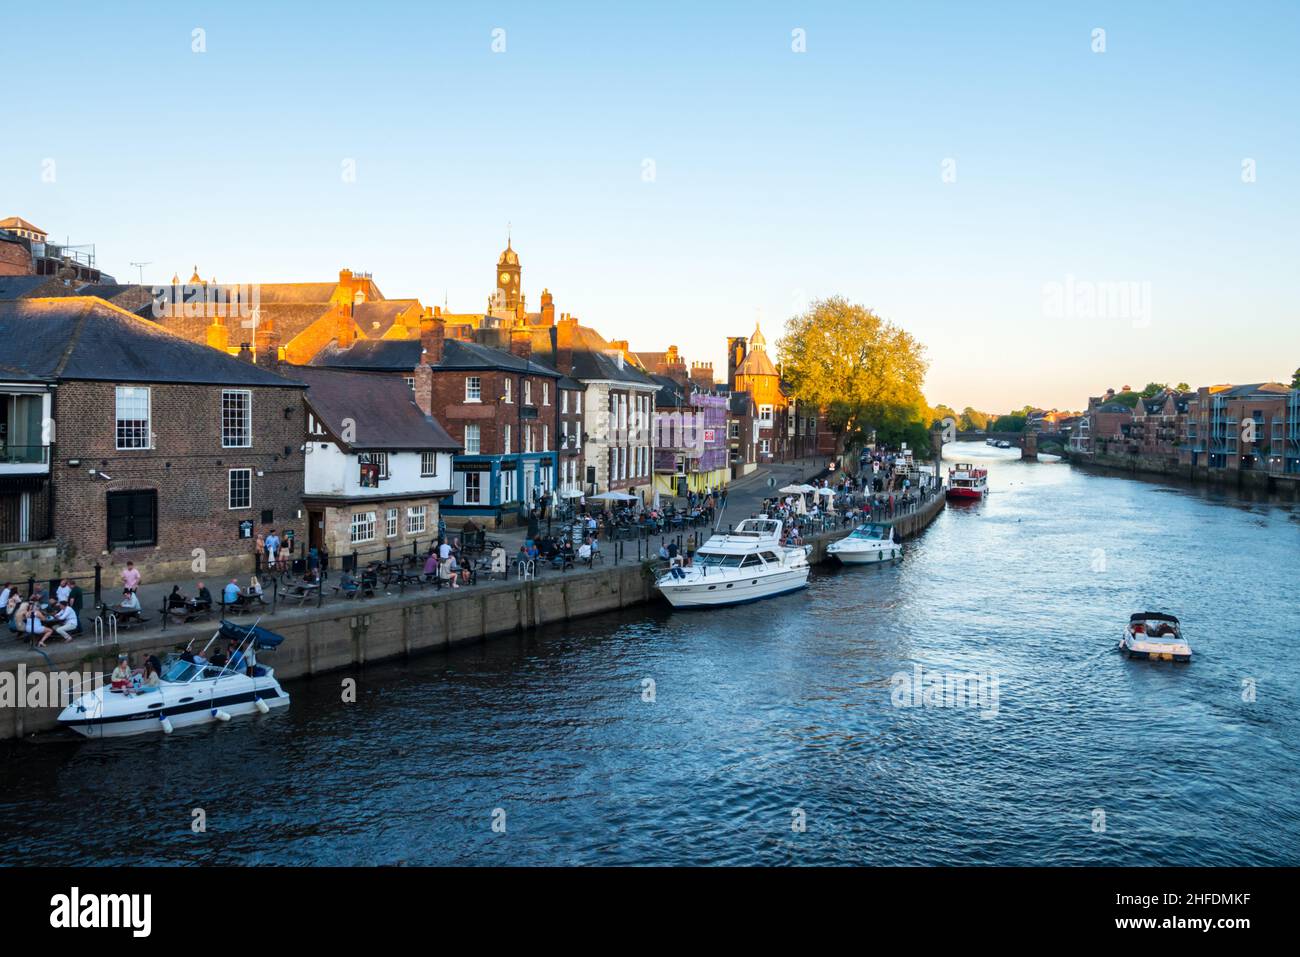 Boats on the River Ouse at York & People Relaxing in beer gardens along the banks of The Ouse Stock Photo